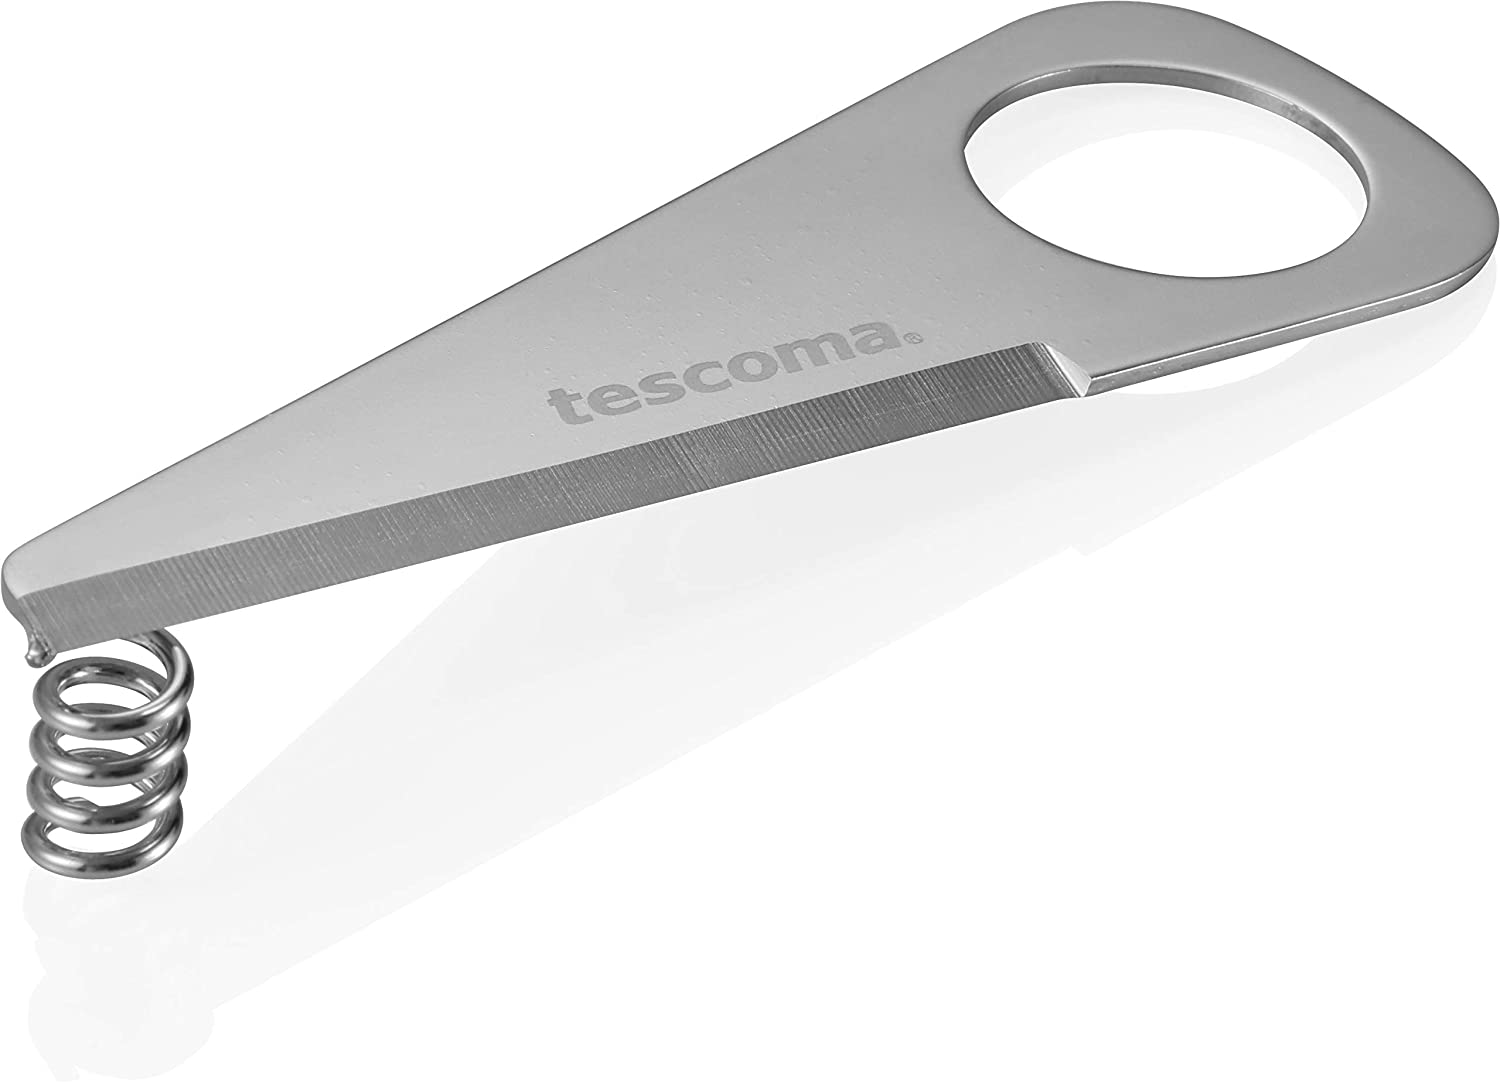 Tescoma GrandCH Stainless Steel Vegetable Cutter Grey